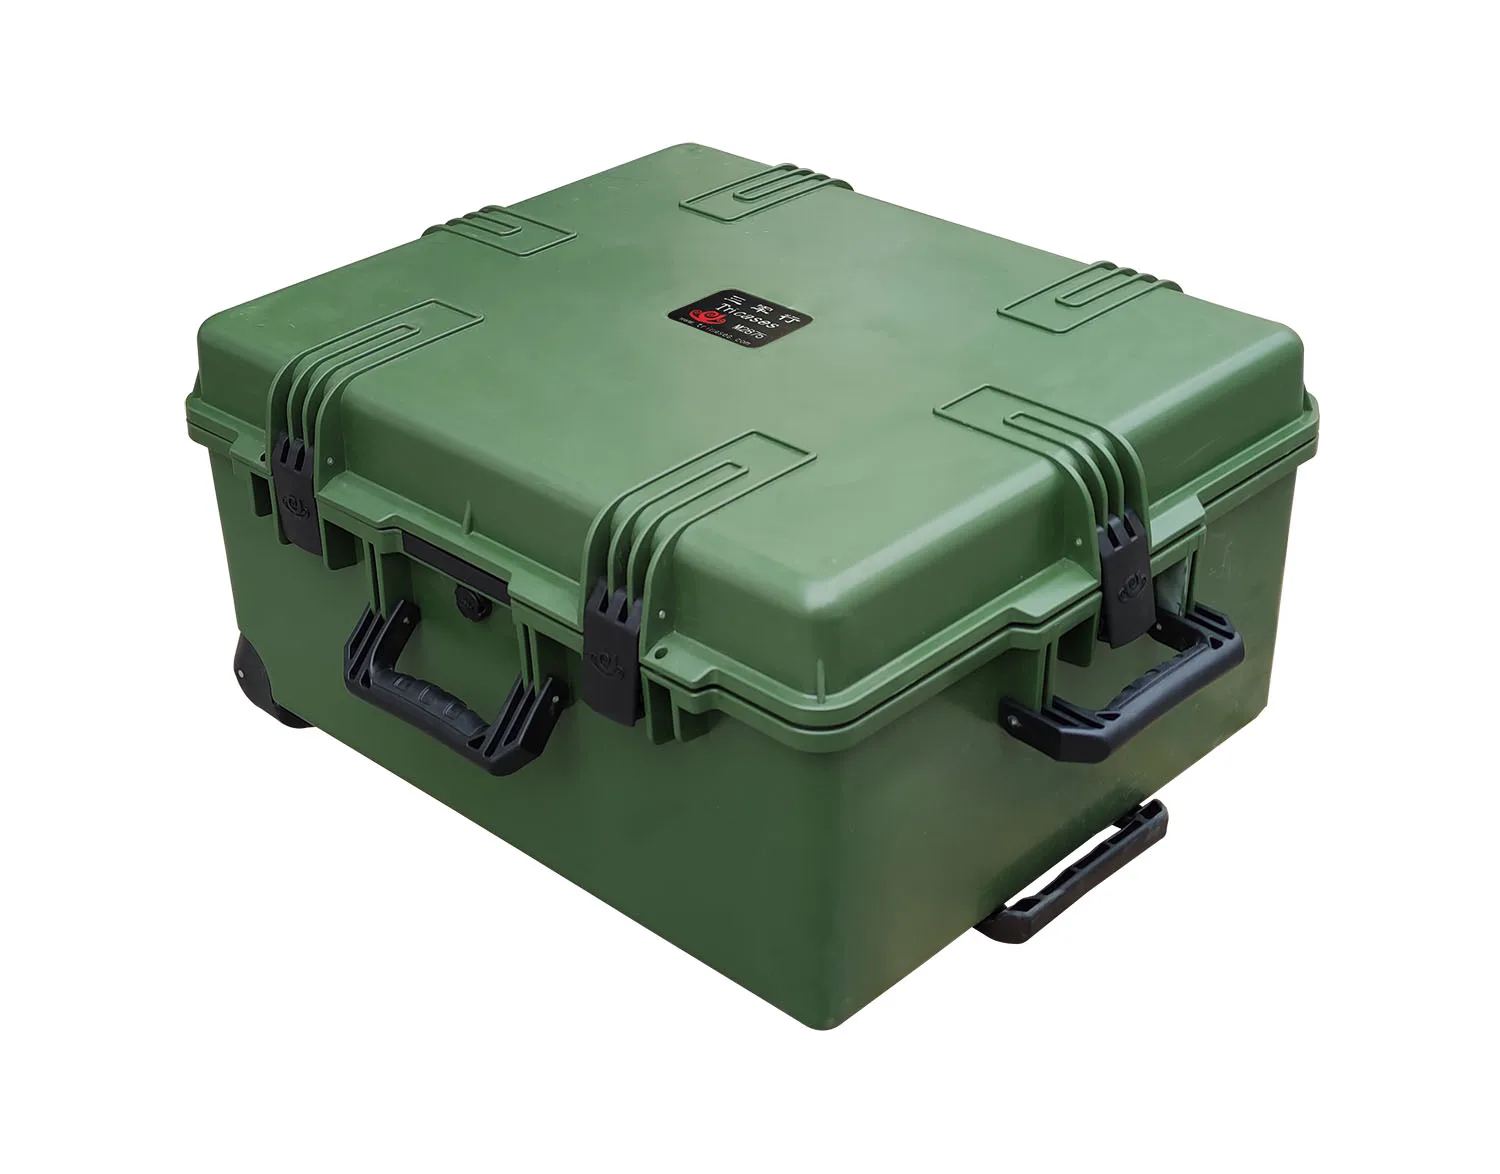 Tricases  M2950 luggage Protective plastic case  Hard Plastic high quality military suitcase